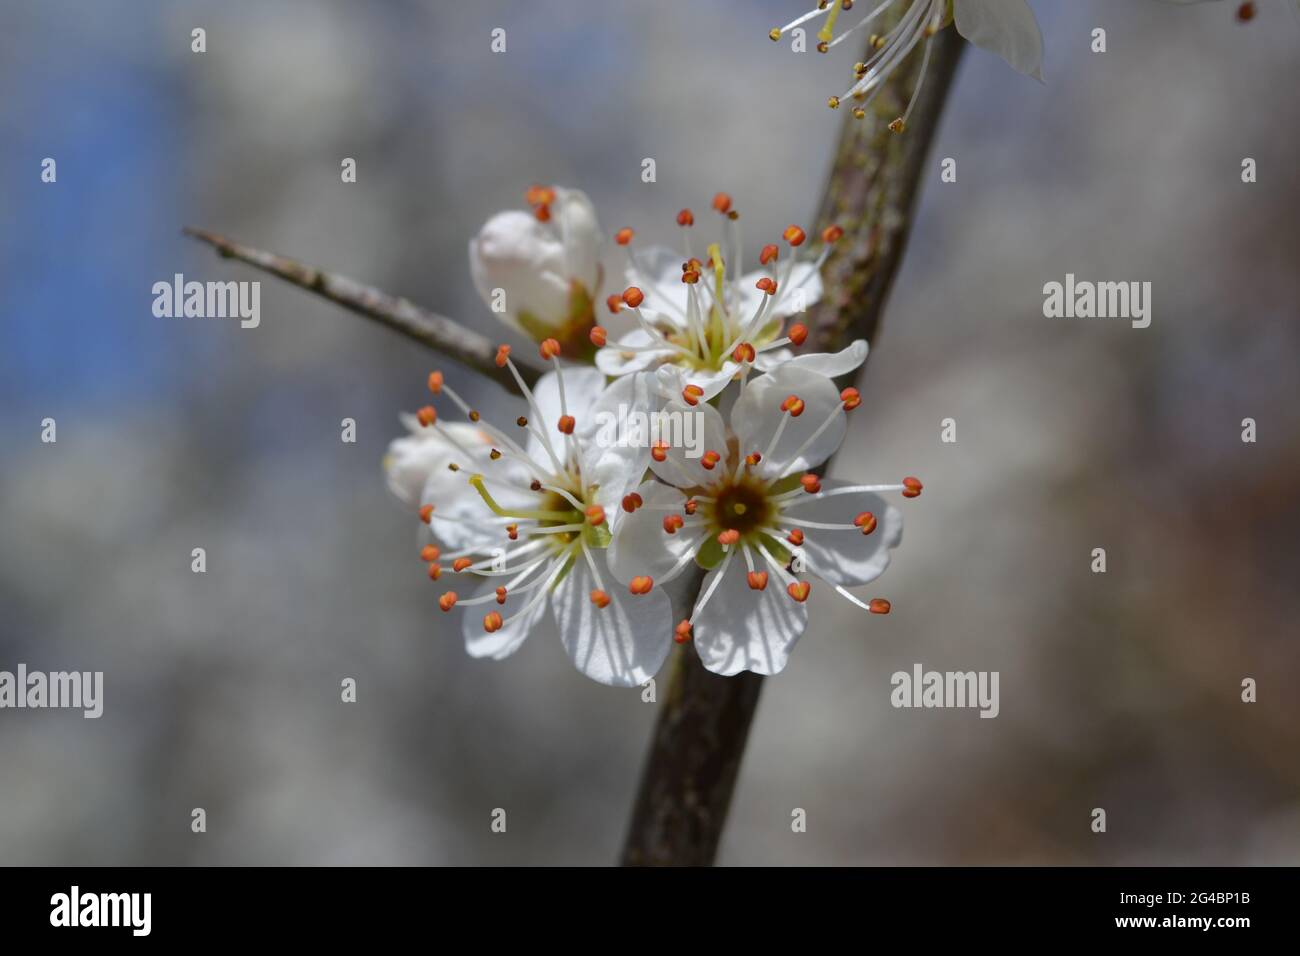 Detail of blackthorn in blossom with thorn, Prunus spinosa. Stock Photo